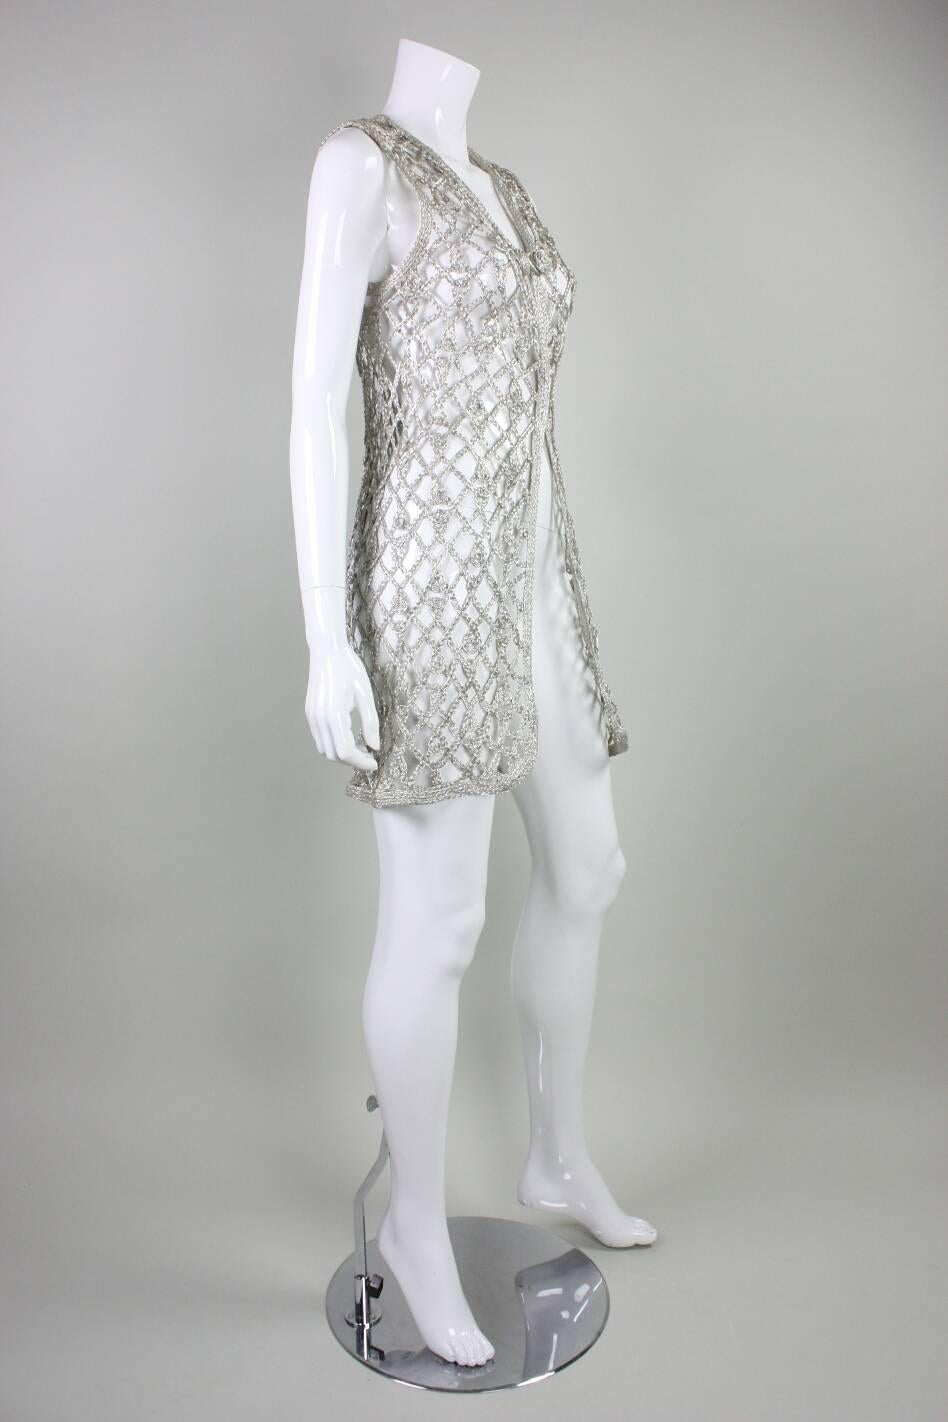 Vintage 1960's braided silver vest.  Unlined.  Looped closure at center front bust.

Measurements-

Bust: 32-34" (approximately)
Waist: 26"
Hips: 36